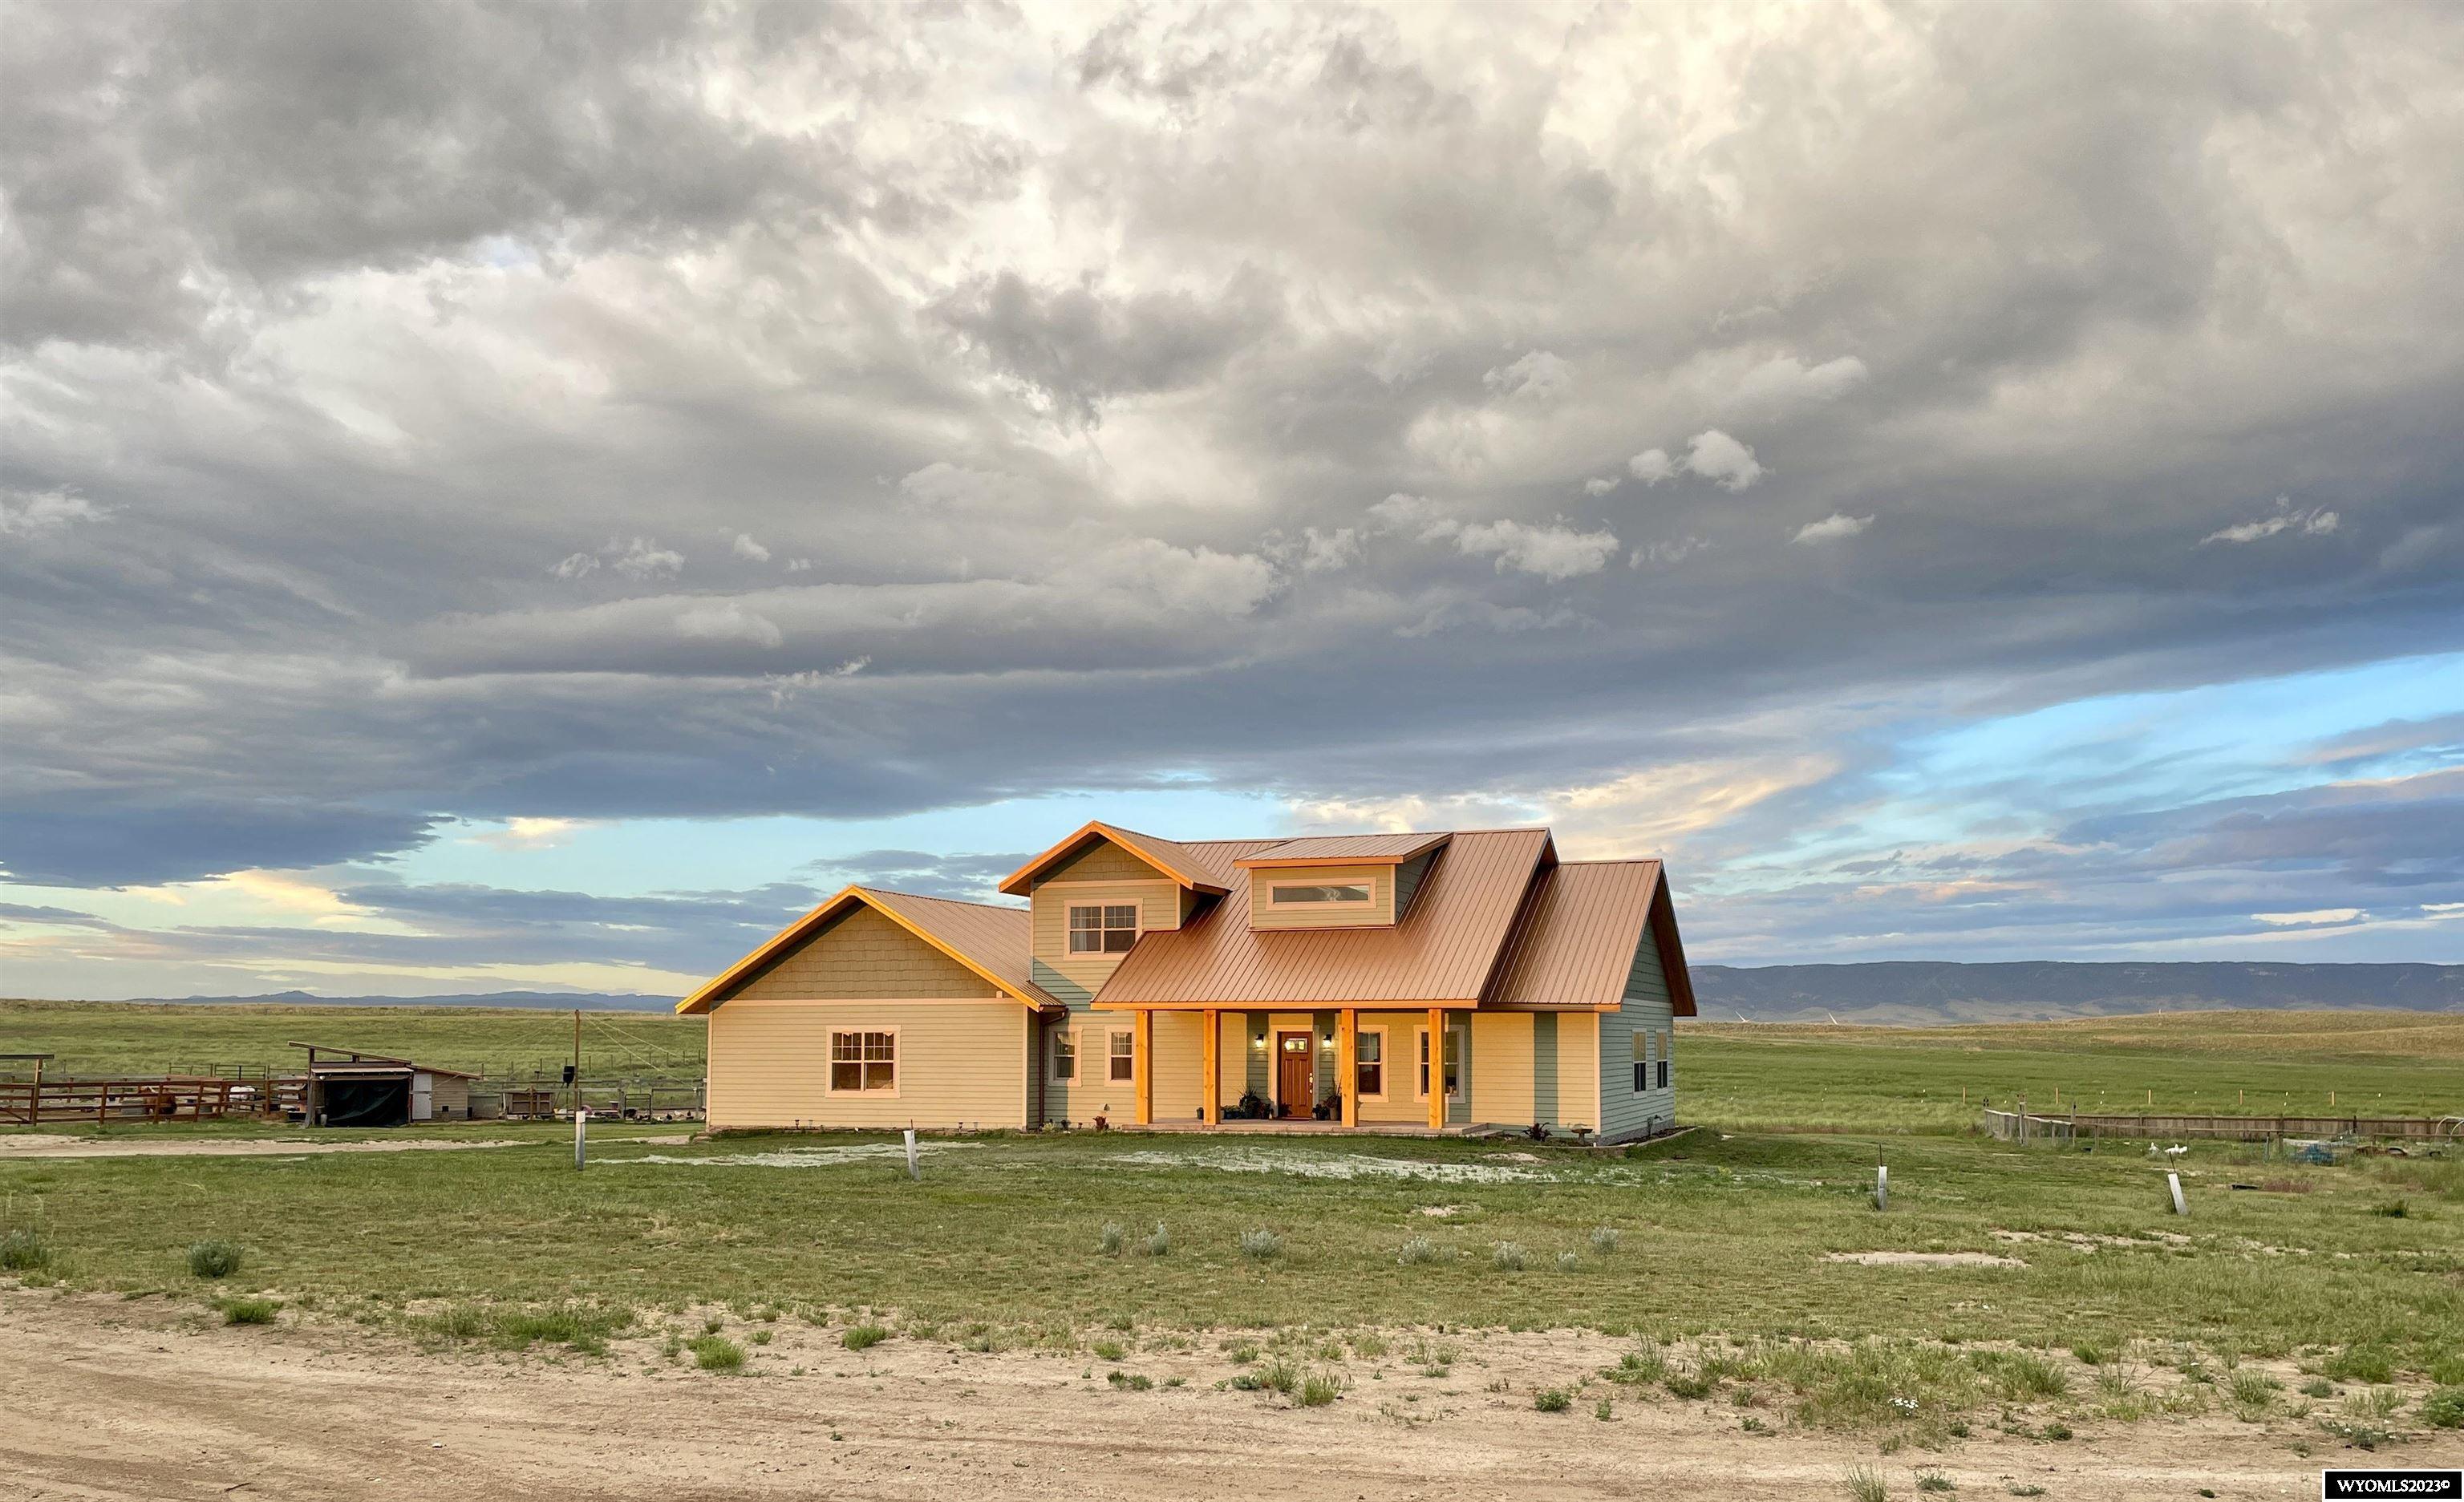 In the market for a Second home? Maybe just want some acreage for your animals? Built right the first time! Cactus Ranch features a modern, highly energy-efficient 4 bedroom 4.5 bath (each bedroom has an en-suite) home situated on a combined 190.07± acres of land only minutes from Casper, Wyoming. Master bedroom, bathroom, & laundry all on the main floor. End-of-the-road privacy. Very private. Quiet location. Pasture & shelter for several horses. Very close to Casper-Wyoming's business & medical center. Wireless internet currently provided by Mountain West Technologies. Work or study remotely from home! Private well permit #P204710.0W. Built with Fox Blocks Insulated Concrete Forms (ICF) so walls are almost 12" thick.   Casper is located on the North Platte River, famous for trout fishing, and at the base of Casper Mountain, offering diverse recreation from summertime music festivals to wintertime skiing. Casper is central to the Laramie Range, the Bighorn Mountains, and the Wind River Range.